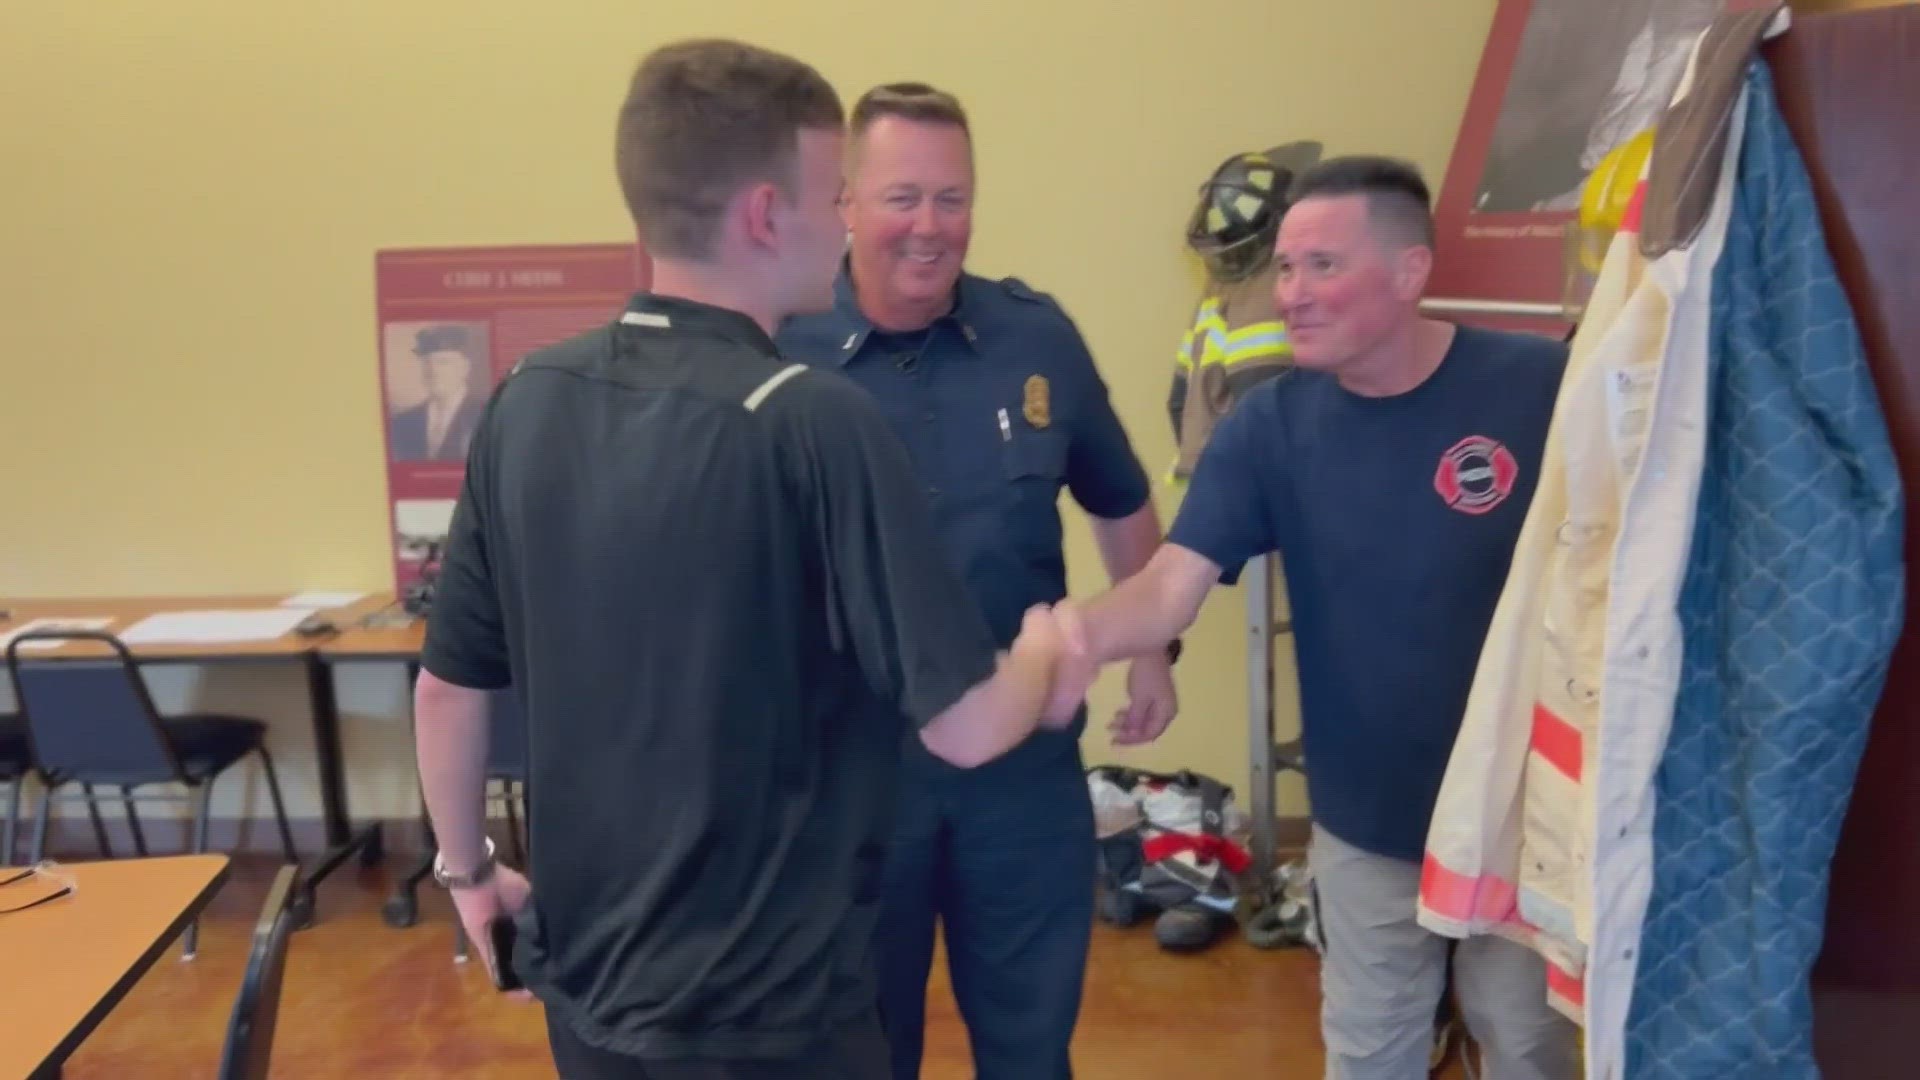 Dylan Ostlund was 14-years-old when he nearly drowned in a flooded Harris Creek. Seven years later, he finally got to thank his heroes at the Waco Fire Department.